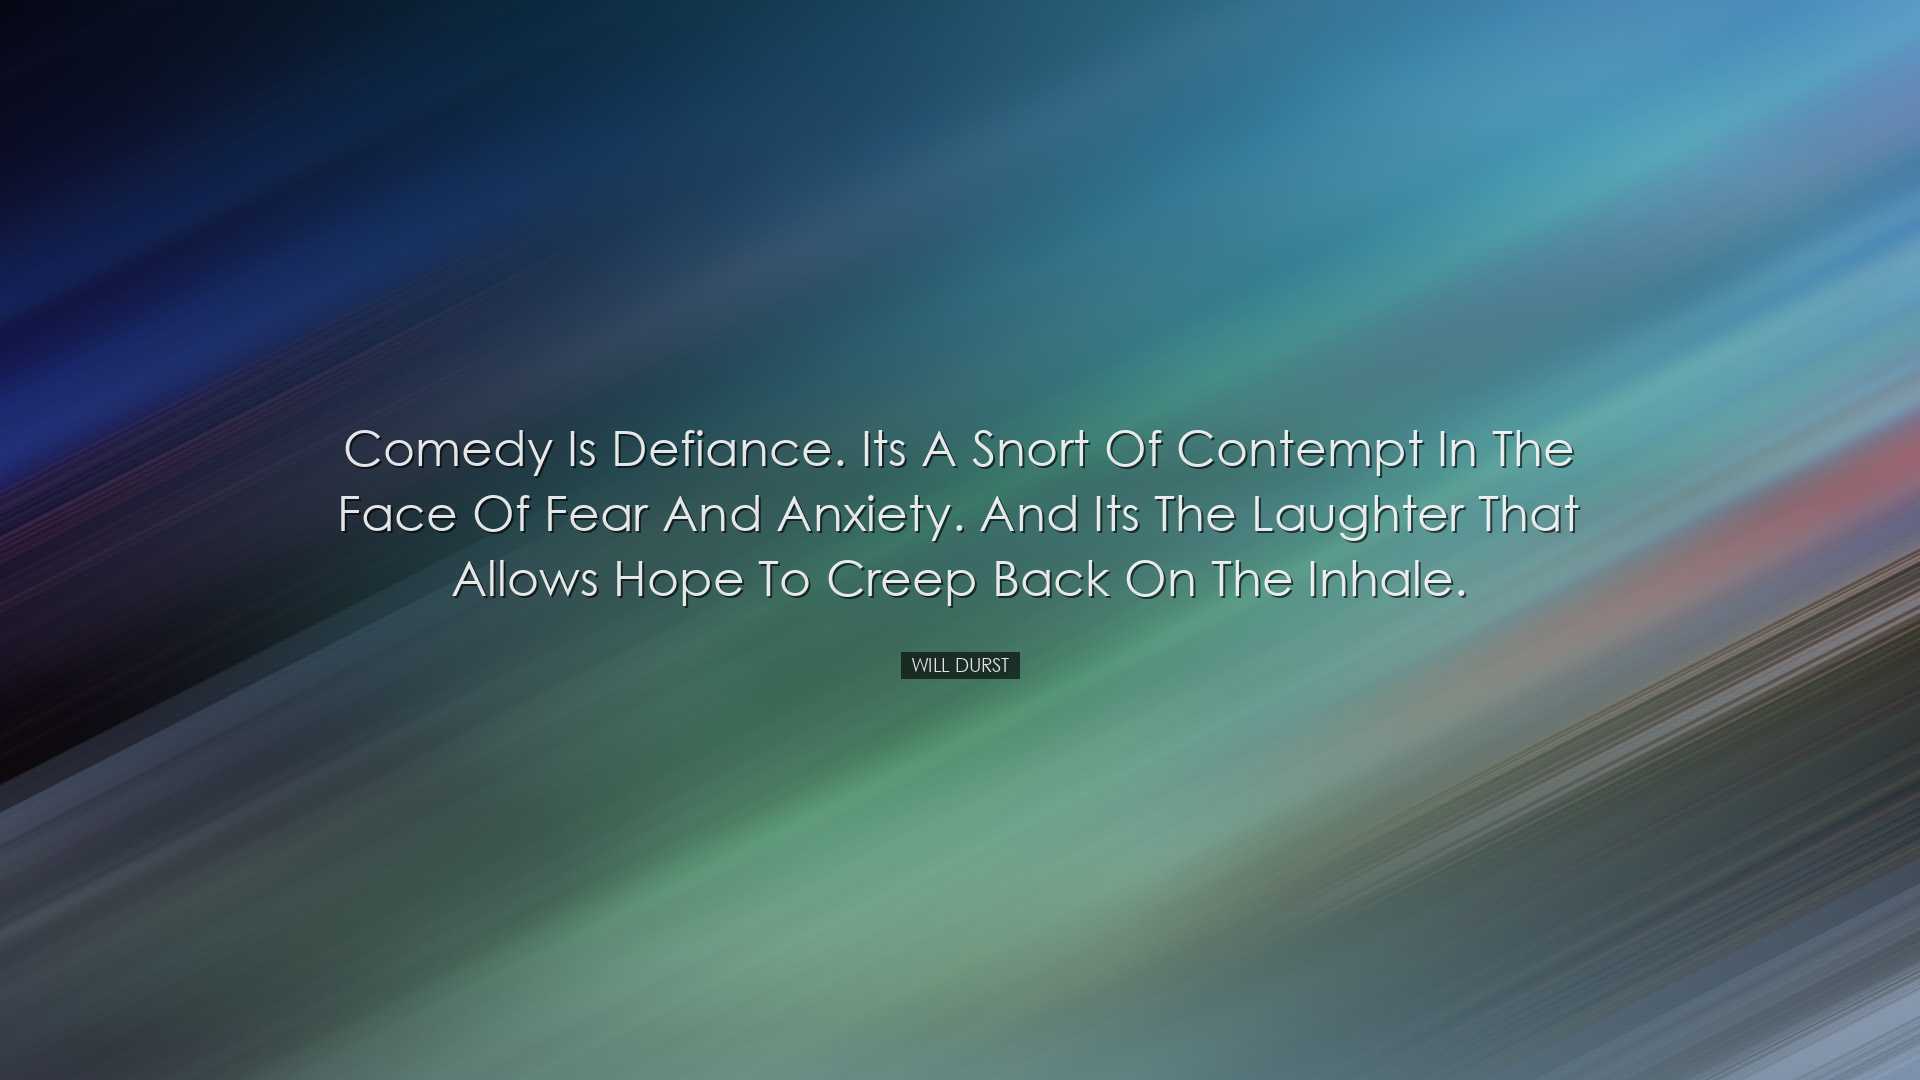 Comedy is defiance. Its a snort of contempt in the face of fear an